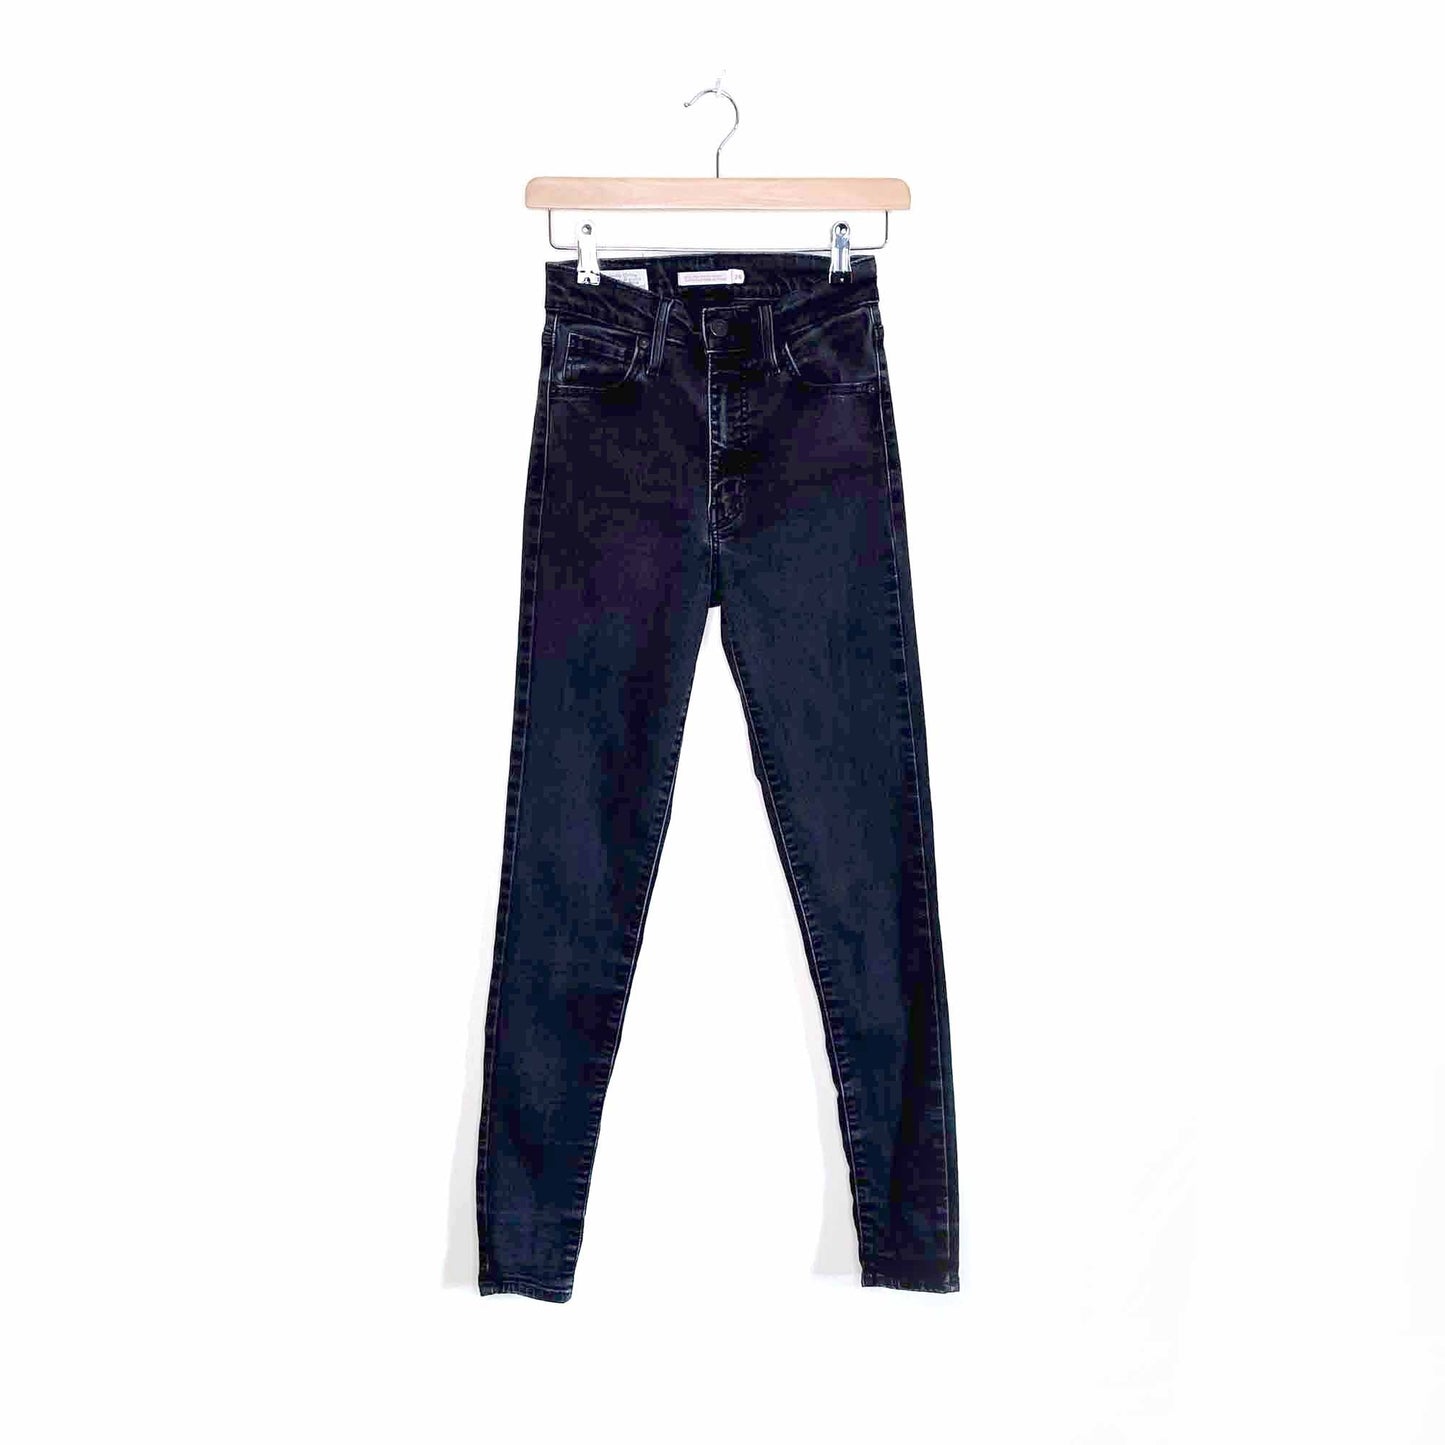 levi's mile high super skinny in faded ink - size 26